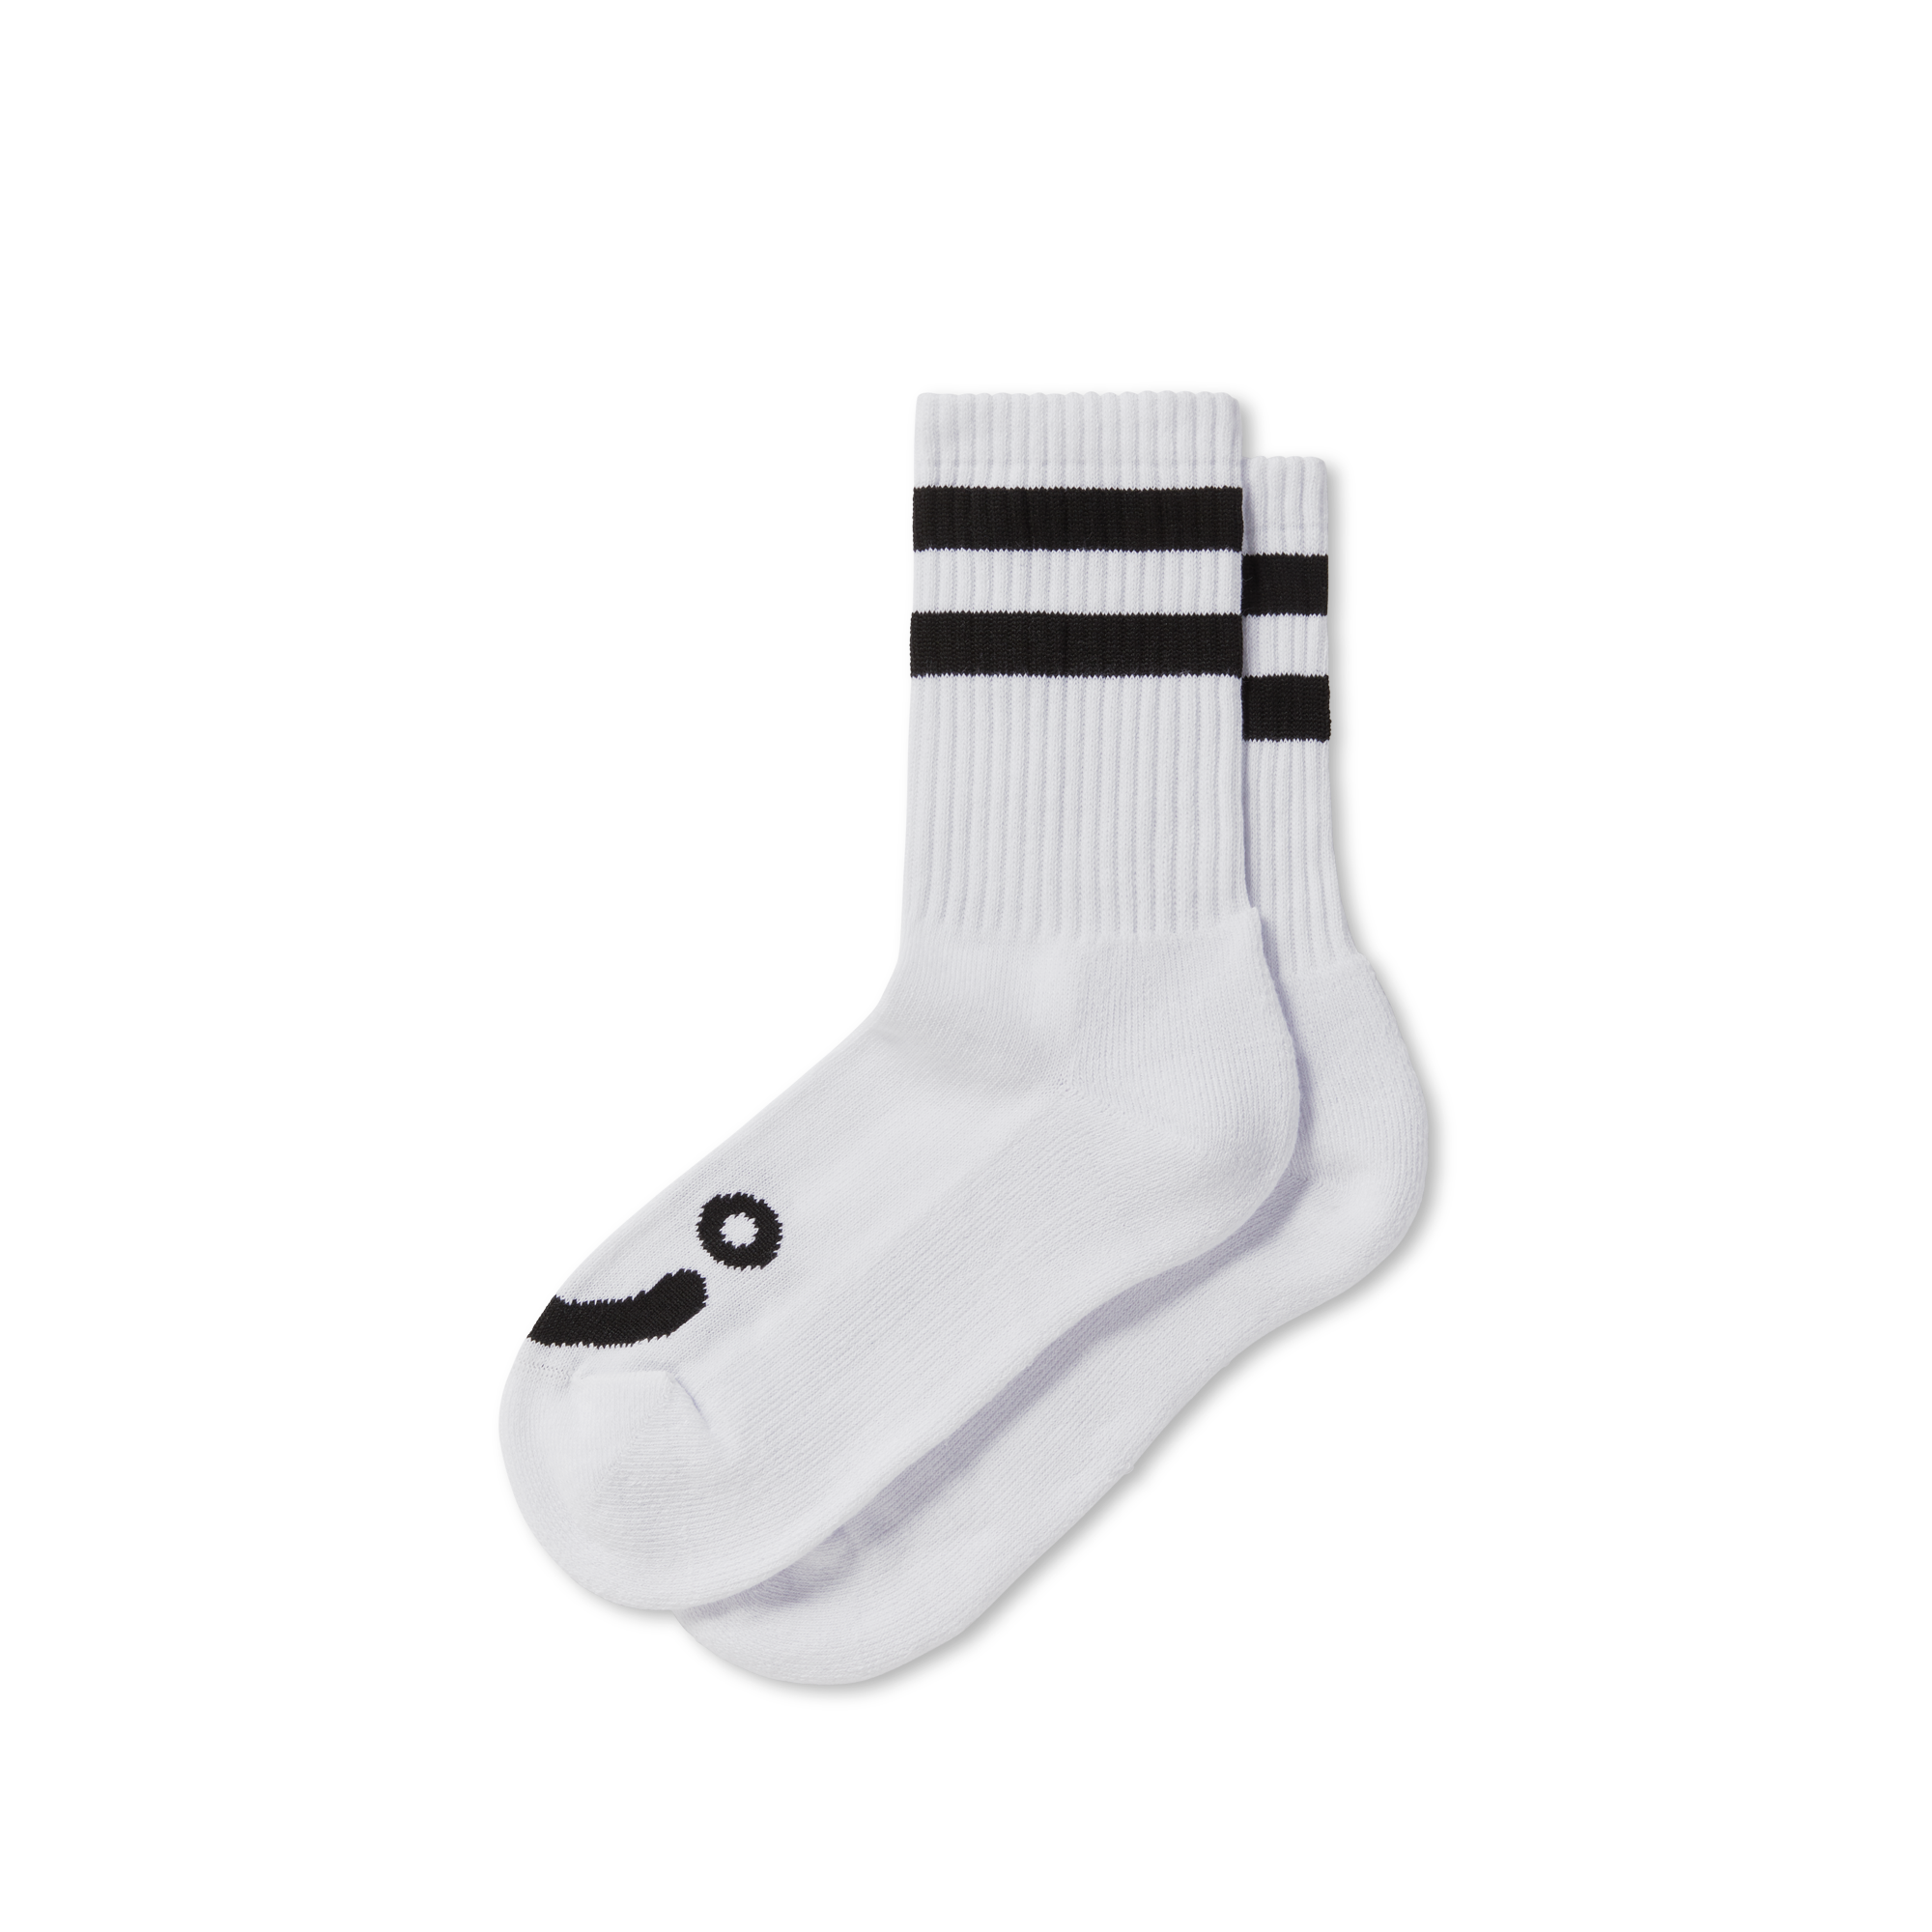 White polar rib socks with black stripes and smiling and frowning face logos. Free delivery on items over £50